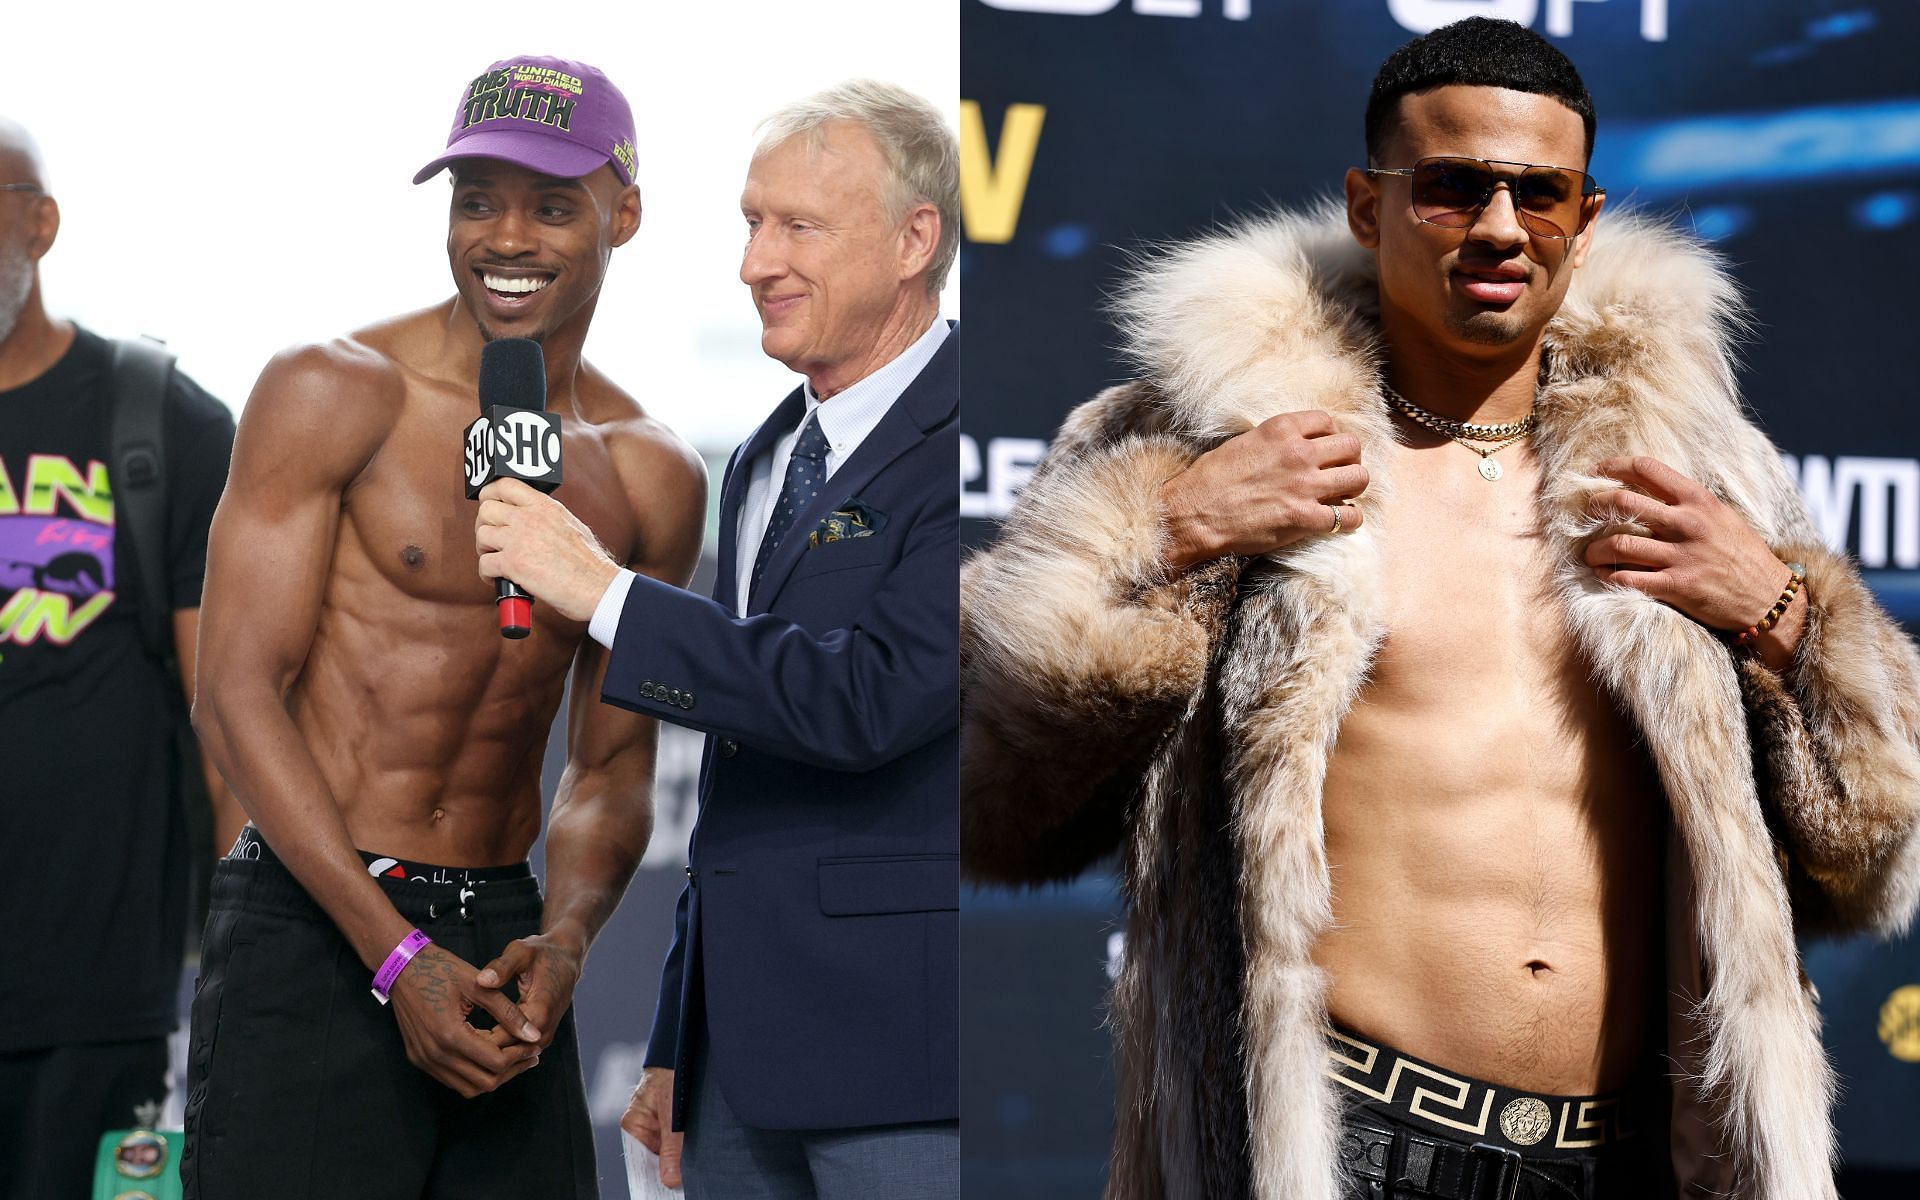 Errol Spence Jr. (left) and Rolly Romero (right) (Image credits Getty Images)